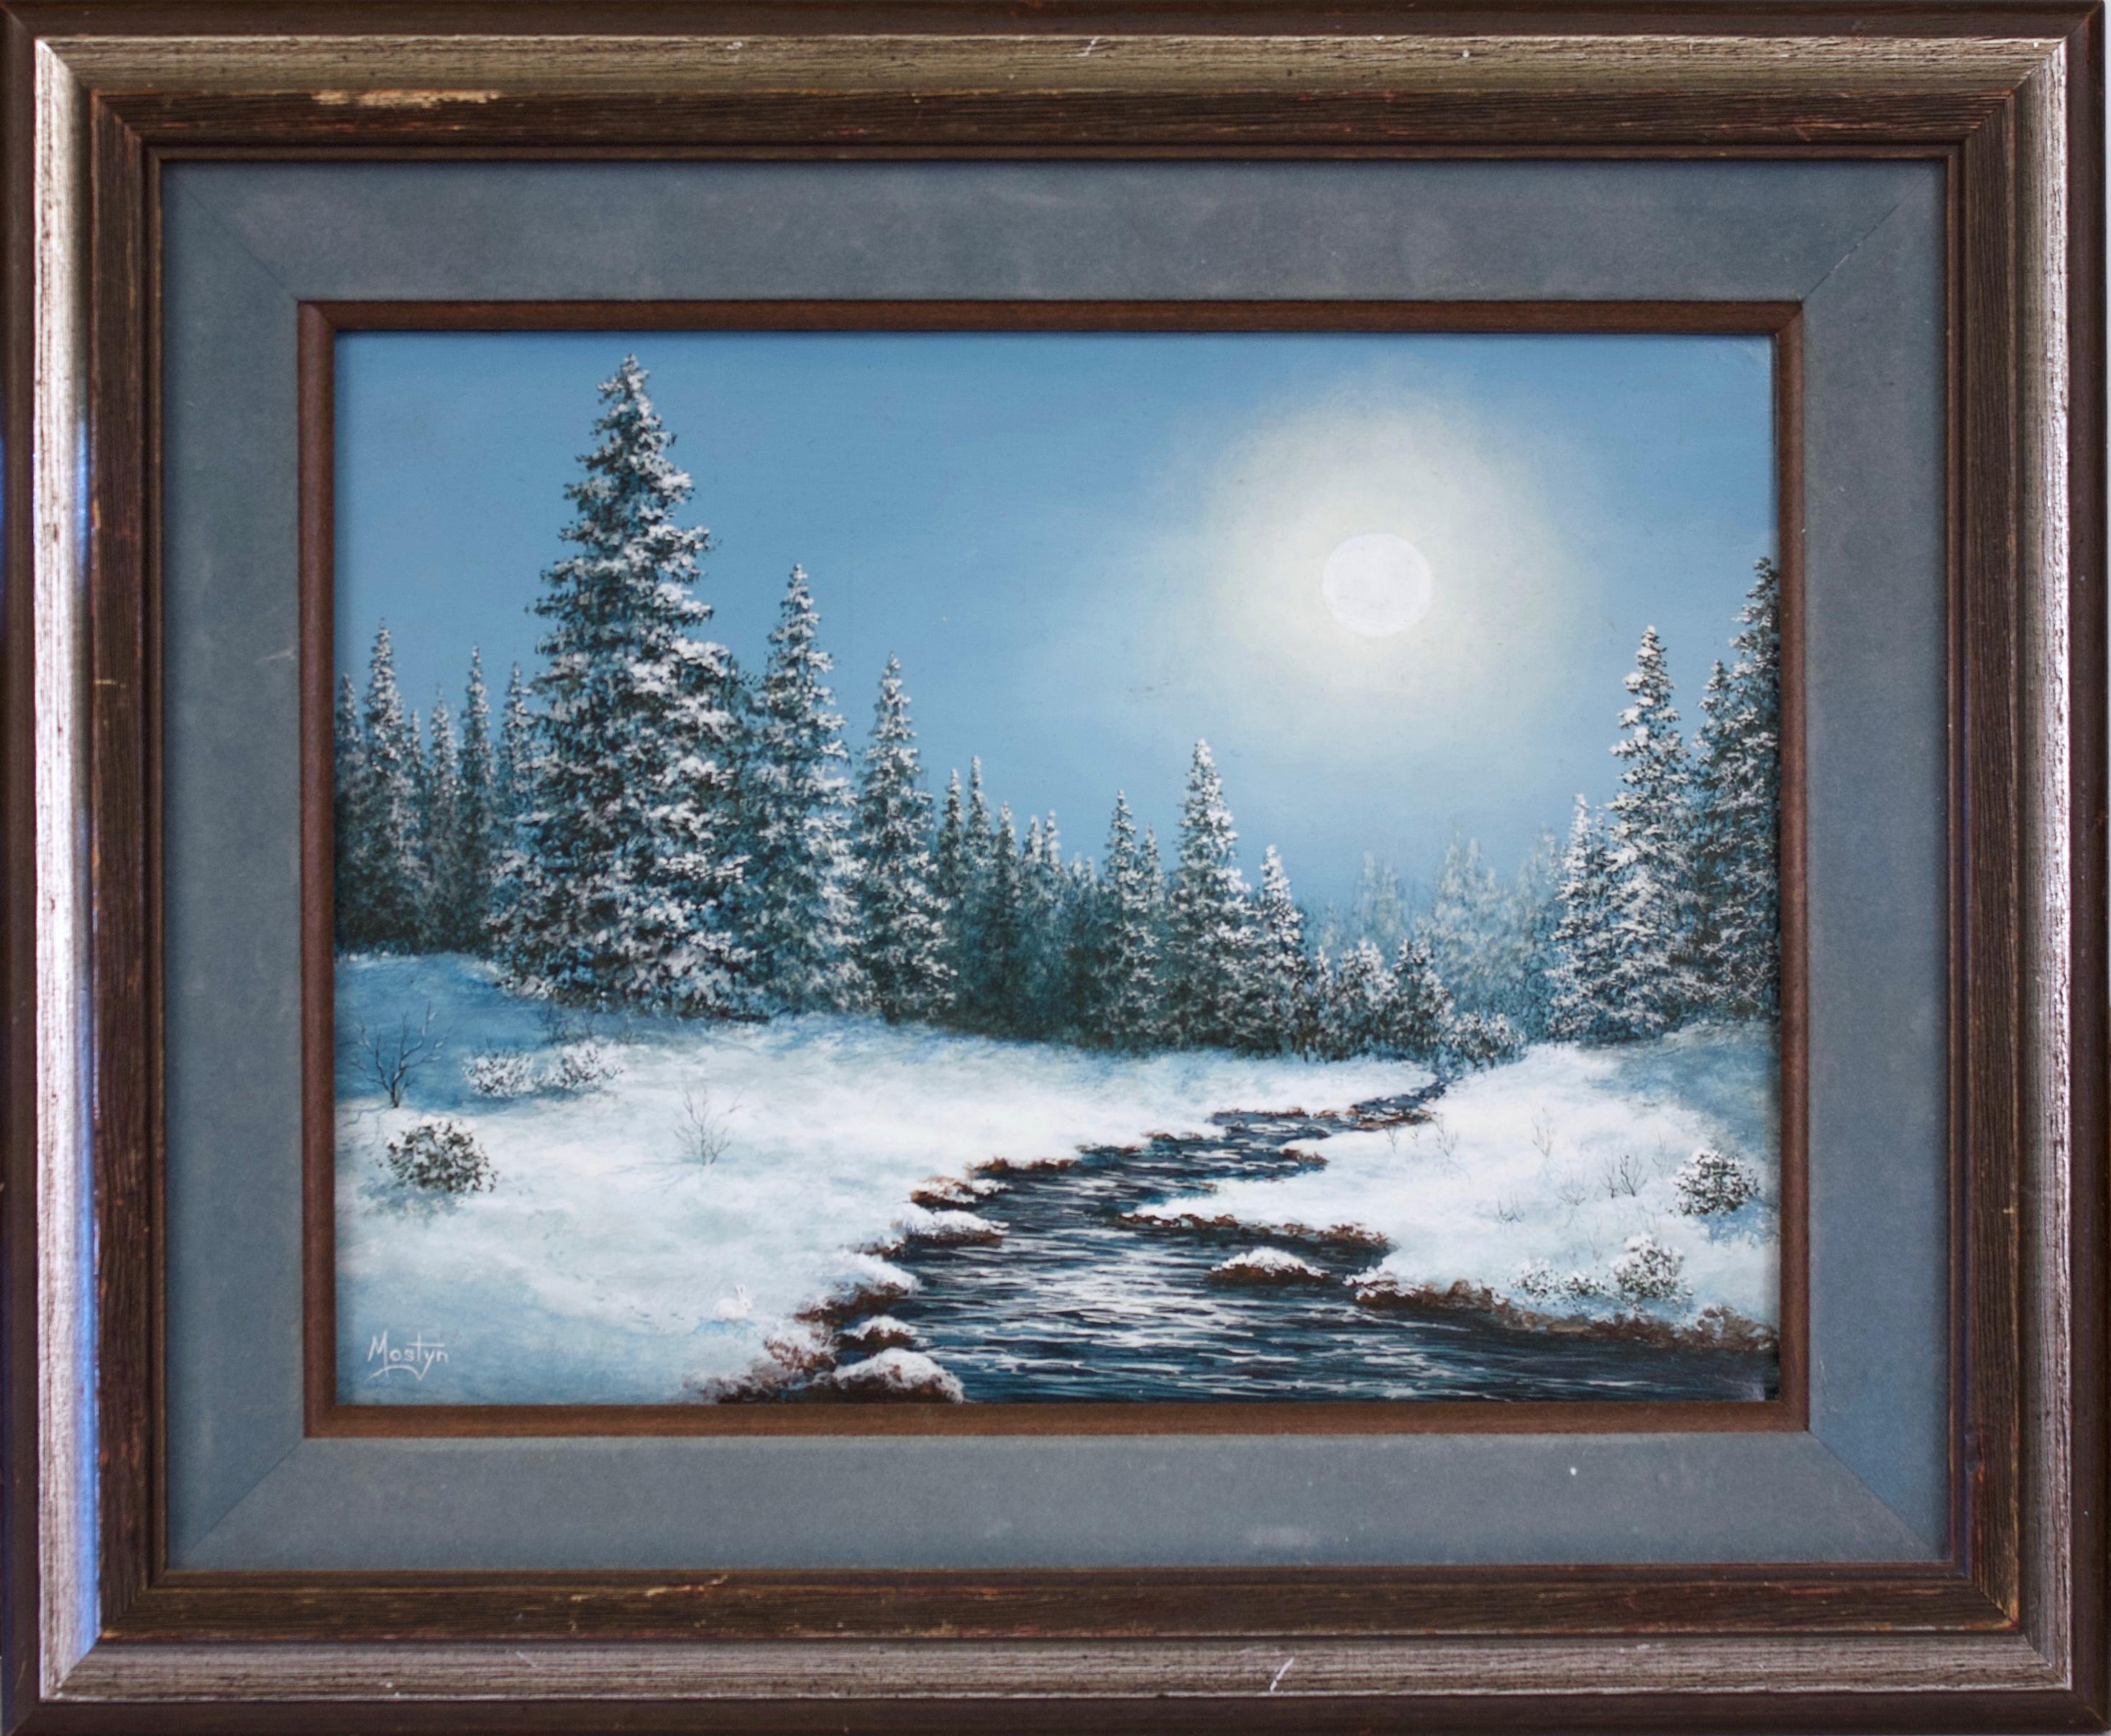 Winter Landscape with Moon - Painting by Mostyn